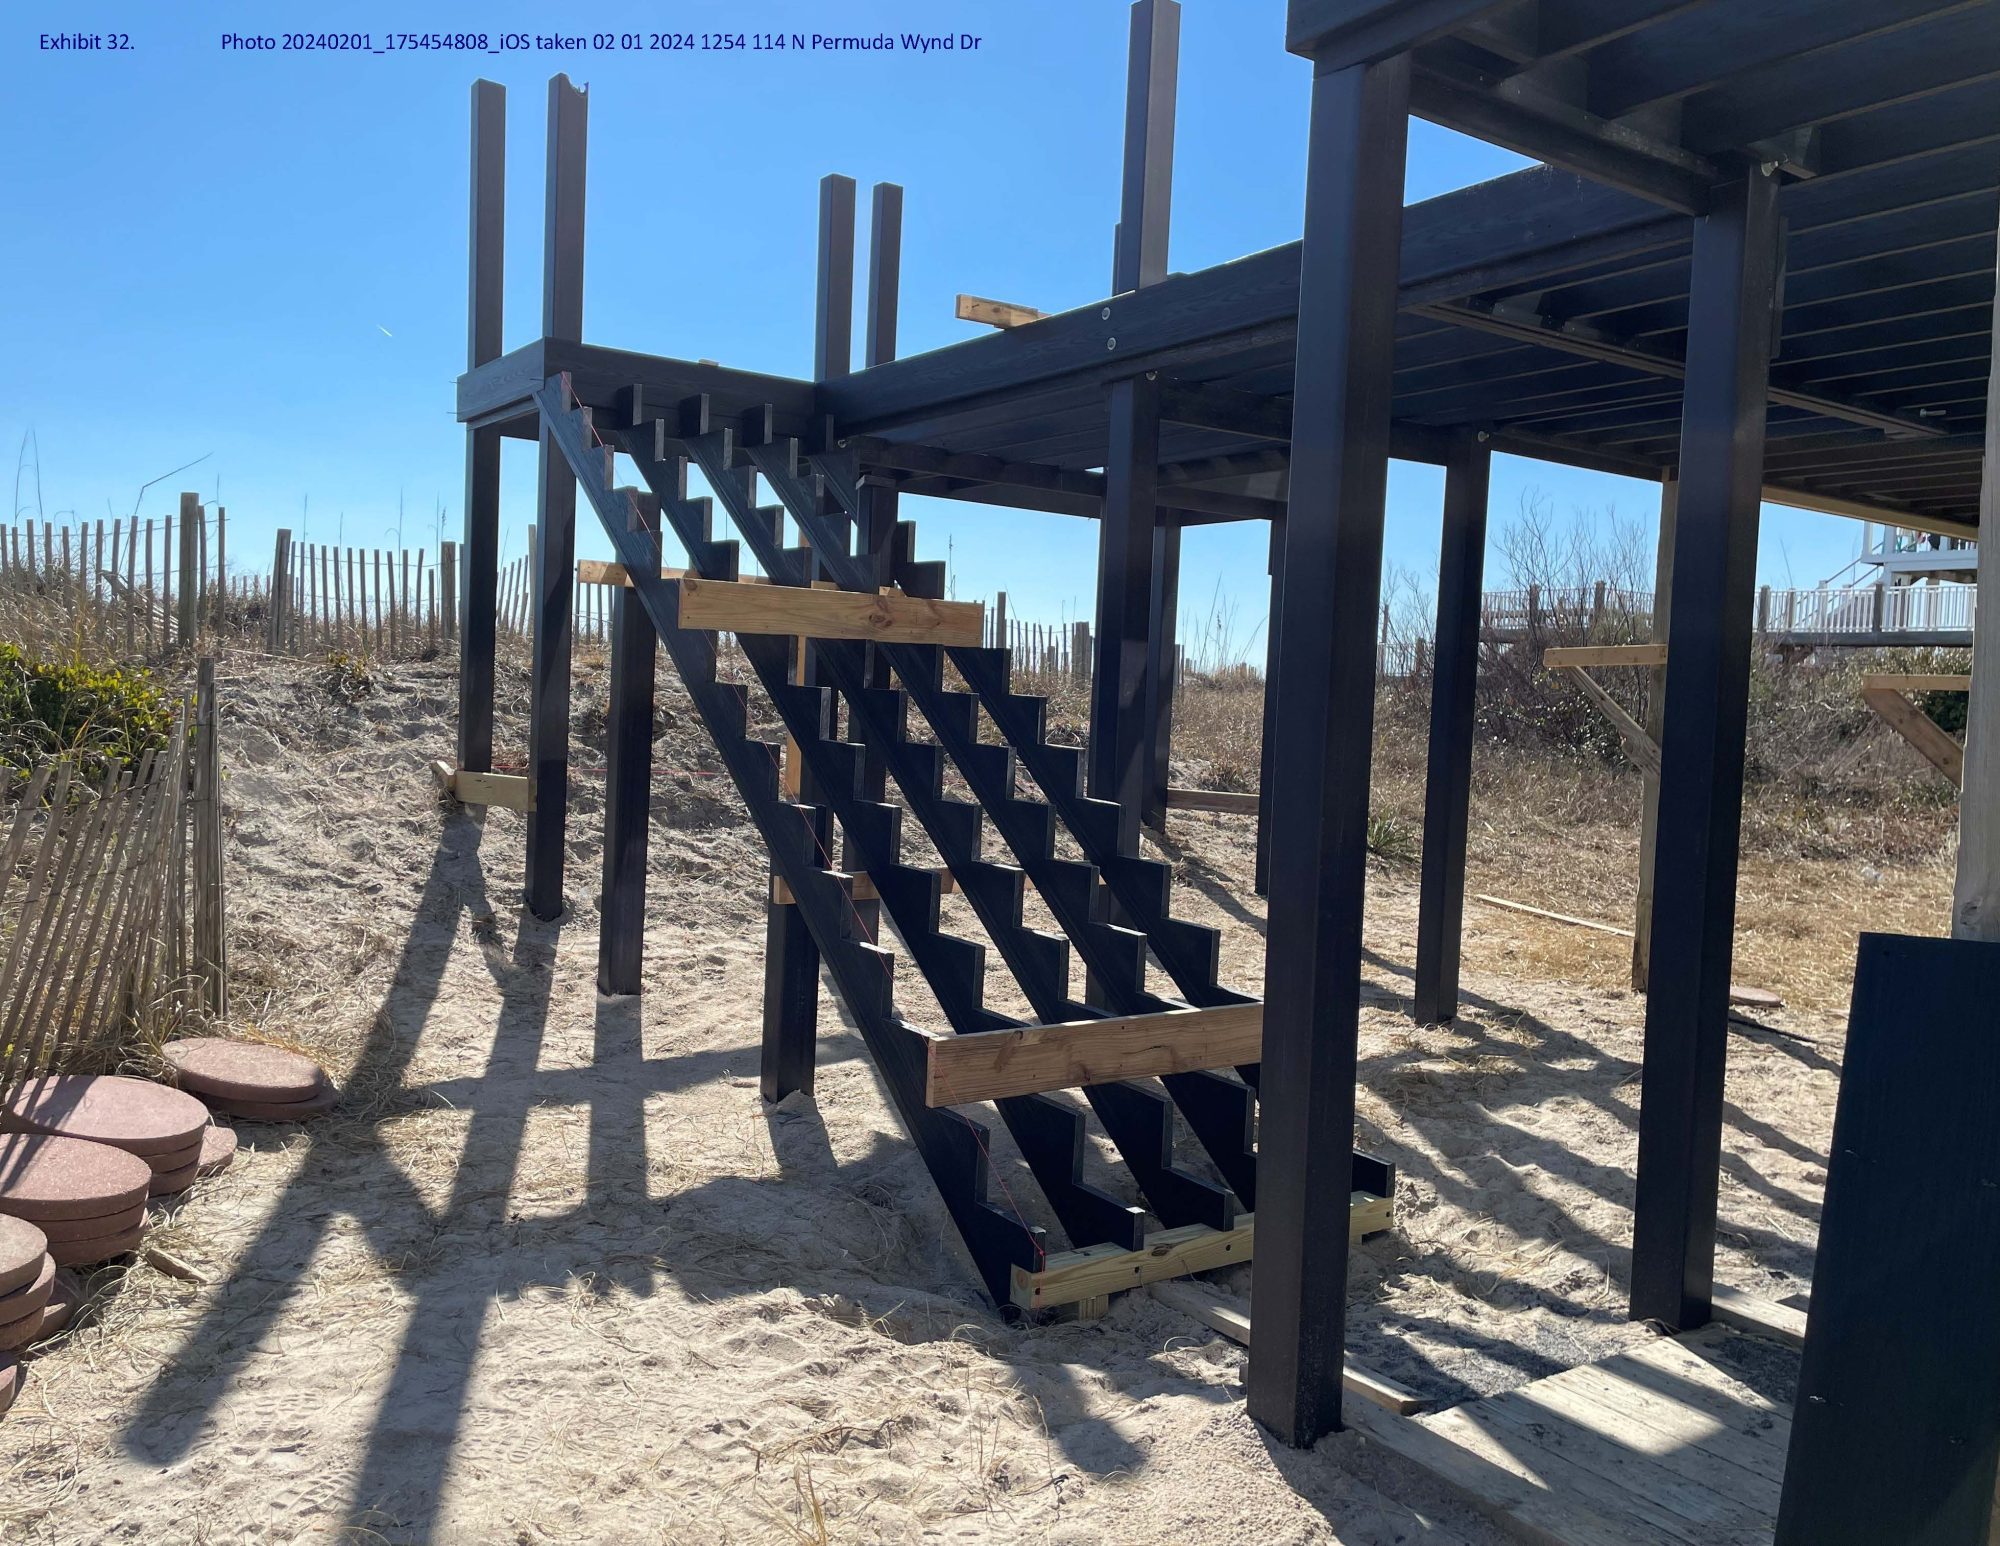 Property owners Philip and Kristen Buckley are appealing a citation they received Feb. 1 that alleges their contractor, Coastland Construction LLC, violated North Topsail Beach’s development ordinance by installing deck pilings within the town’s 5-foot dune buffer zone. Photo: Town records